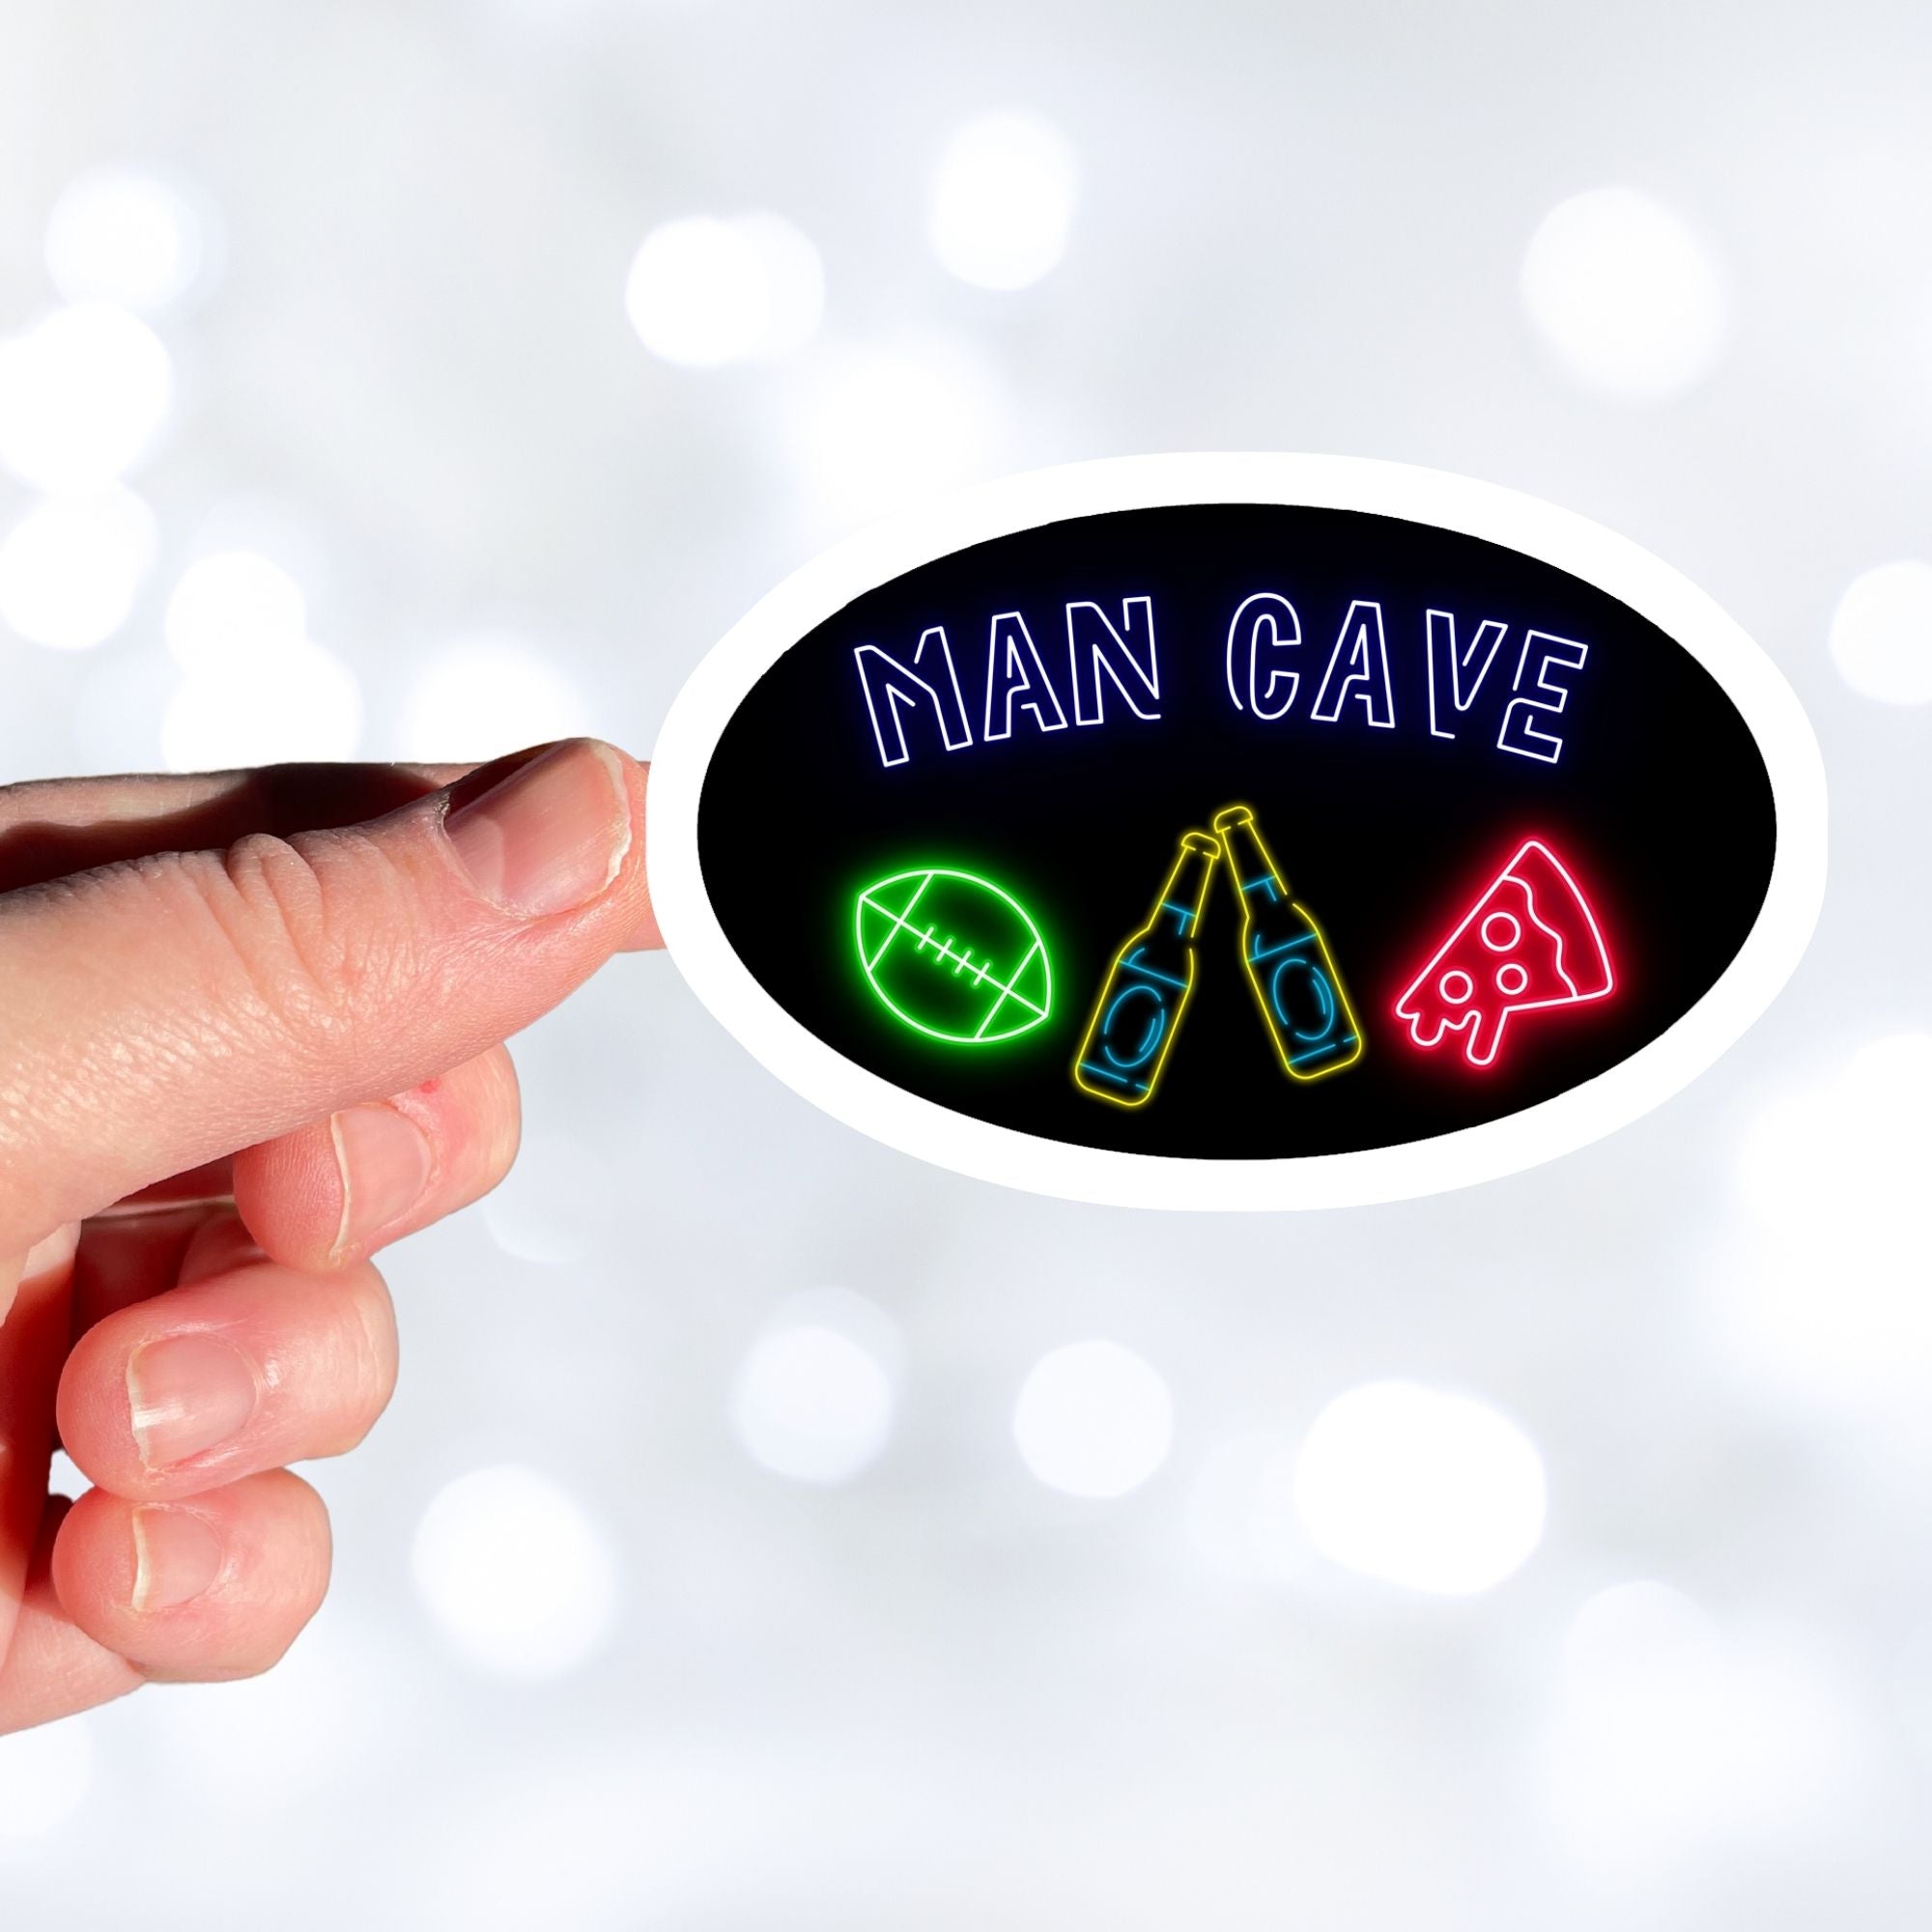 Guys, want to celebrate your man cave? Then this individual die-cut sticker is just what you need! It features a black background with neon images of "Man Cave" written above a football, clinking bottles, and slice of pizza. What more could you want? This image shows a hand holding the Man Cave sticker.